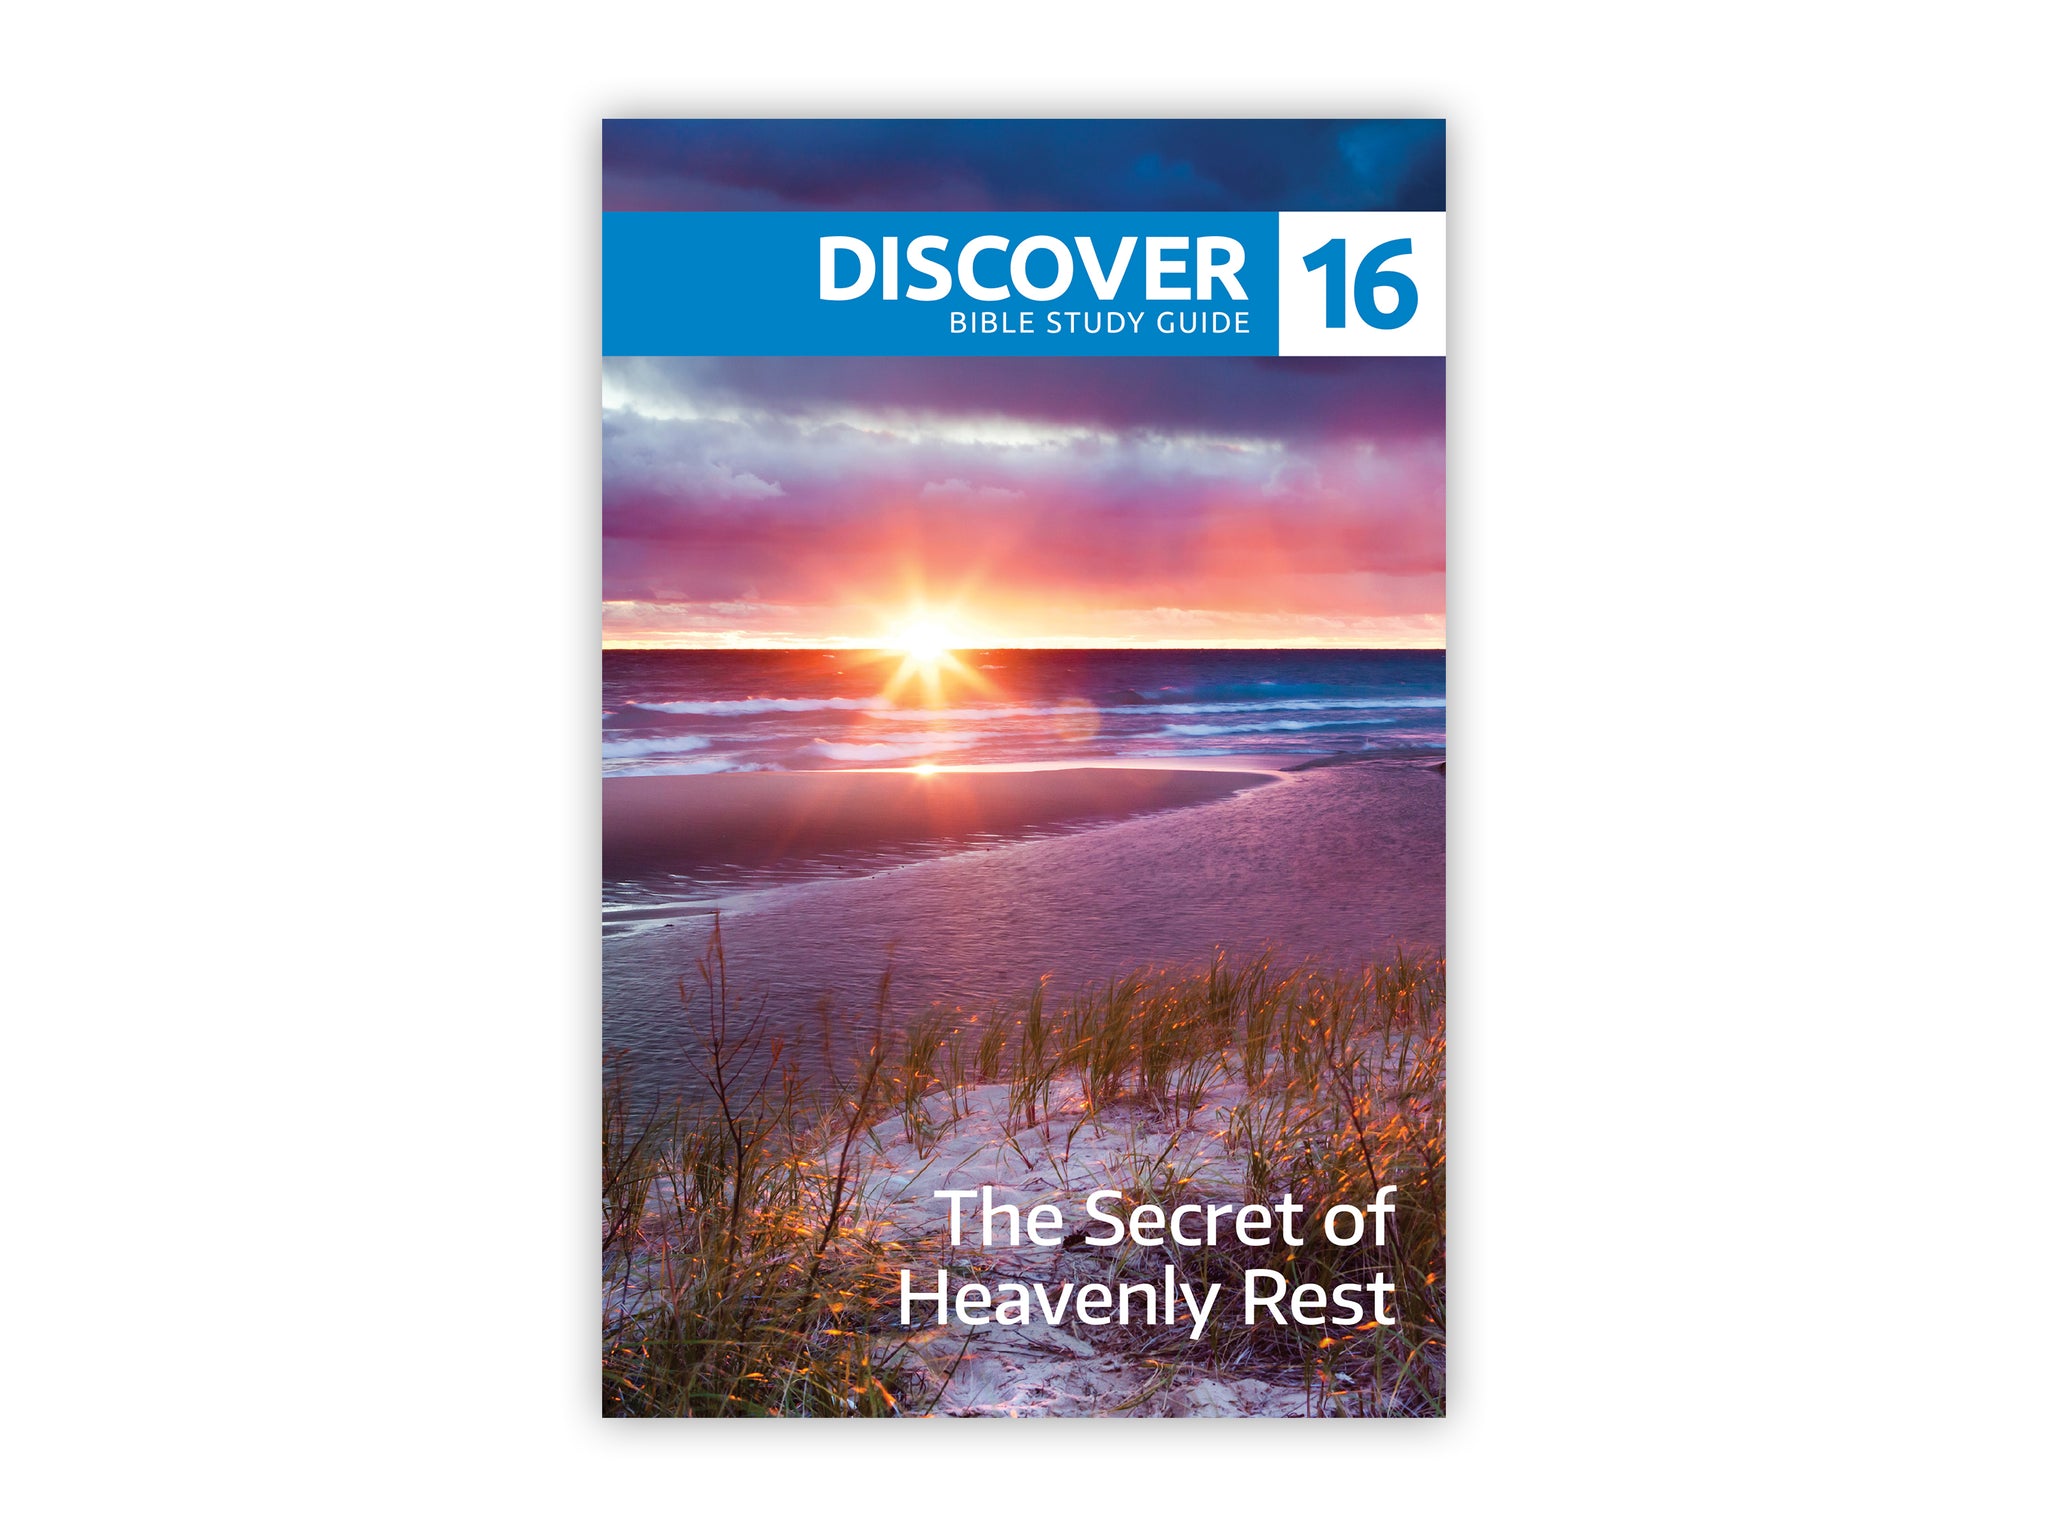 Discover Bible Study Guide #16 - The Secret of Heavenly Rest